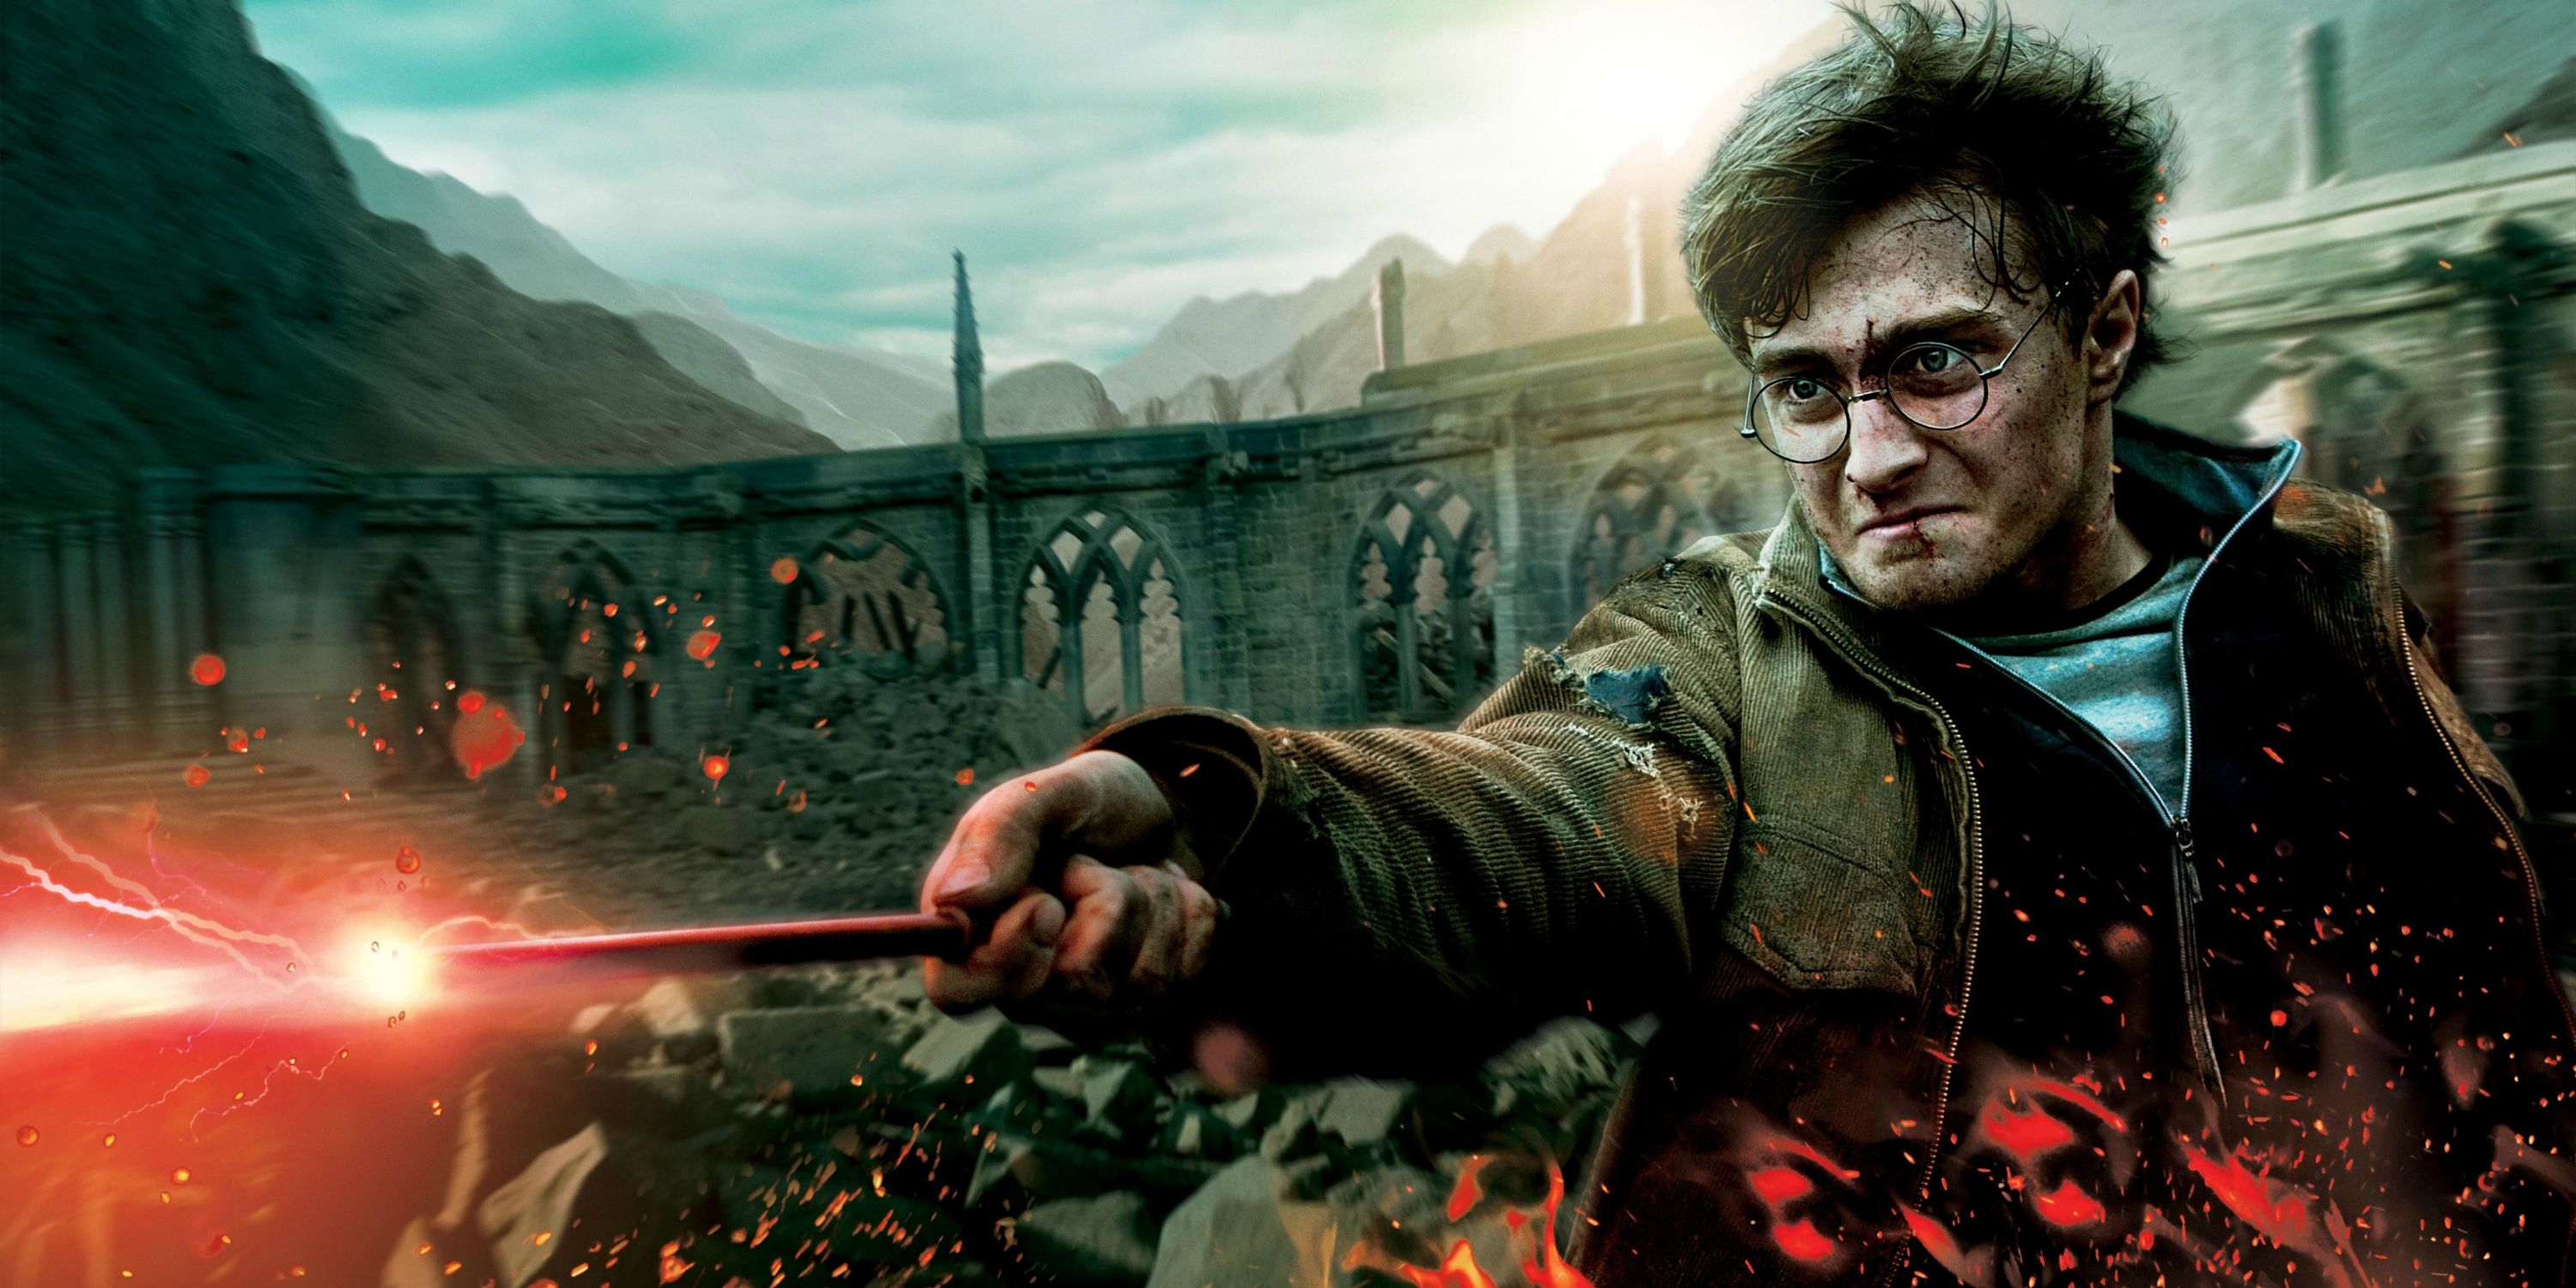 Daniel Radcliffe Would Think About Harry Potter Return